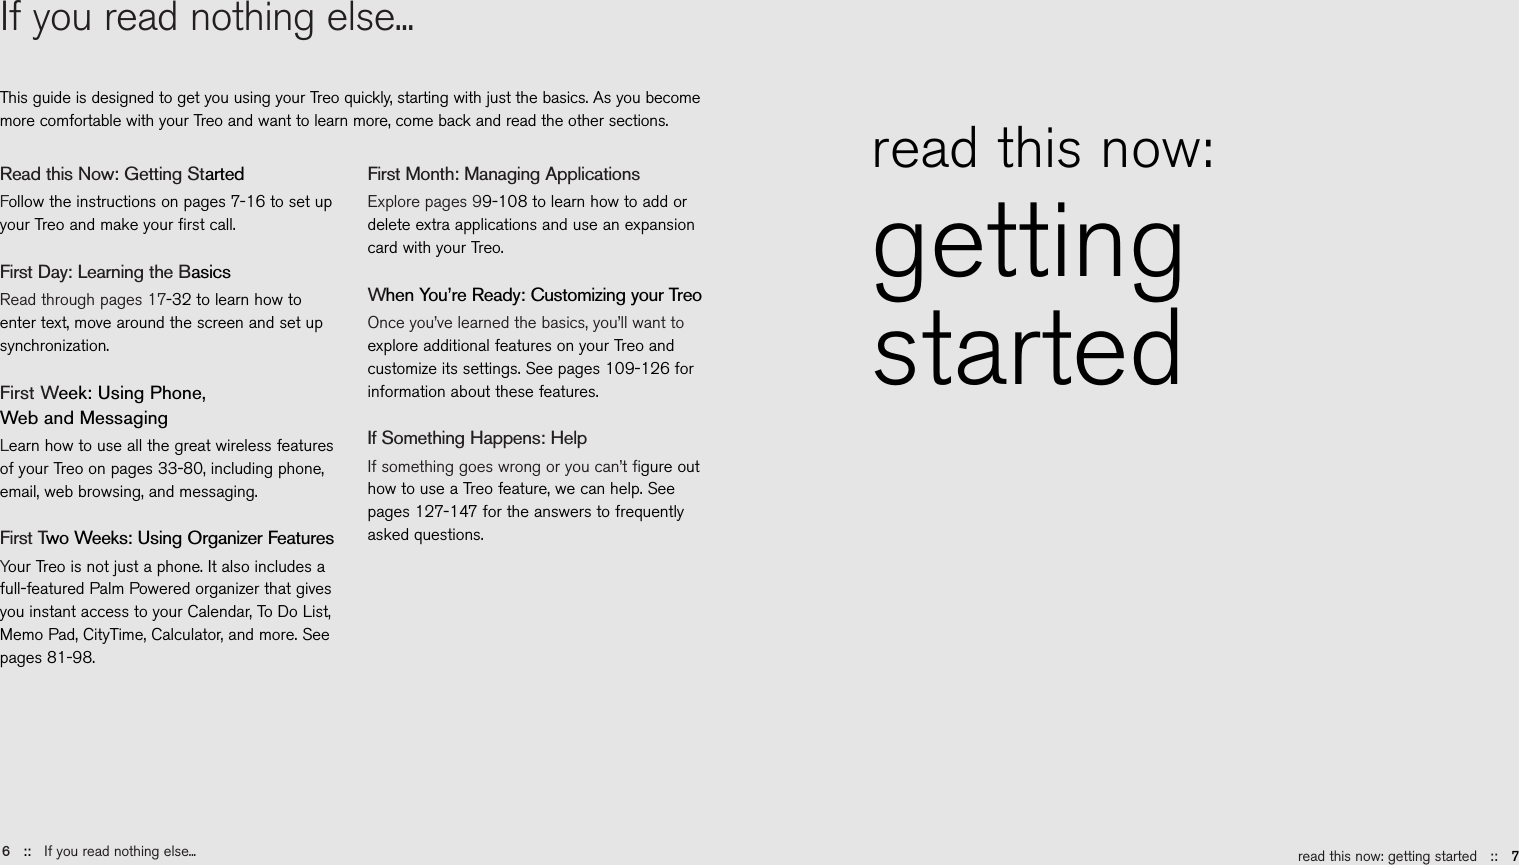 read this now: getting started ::   7If you read nothing else...This guide is designed to get you using your Treo quickly, starting with just the basics. As you becomemore comfortable with your Treo and want to learn more, come back and read the other sections.6::   If you read nothing else...read this now: gettingstartedRead this Now: Getting StartedFollow the instructions on pages 7-16 to set upyour Treo and make your ﬁrst call. First Day: Learning the BasicsRead through pages 17-32 to learn how toenter text, move around the screen and set upsynchronization.First Week: Using Phone, Web and MessagingLearn how to use all the great wireless featuresof your Treo on pages 33-80, including phone,email, web browsing, and messaging.First Two Weeks: Using Organizer FeaturesYour Treo is not just a phone. It also includes afull-featured Palm Powered organizer that givesyou instant access to your Calendar, To Do List,Memo Pad, CityTime, Calculator, and more. Seepages 81-98.First Month: Managing ApplicationsExplore pages 99-108 to learn how to add ordelete extra applications and use an expansioncard with your Treo.When You’re Ready: Customizing your TreoOnce you’ve learned the basics, you’ll want toexplore additional features on your Treo andcustomize its settings. See pages 109-126 forinformation about these features.If Something Happens: HelpIf something goes wrong or you can’t ﬁgure outhow to use a Treo feature, we can help. Seepages 127-147 for the answers to frequentlyasked questions.